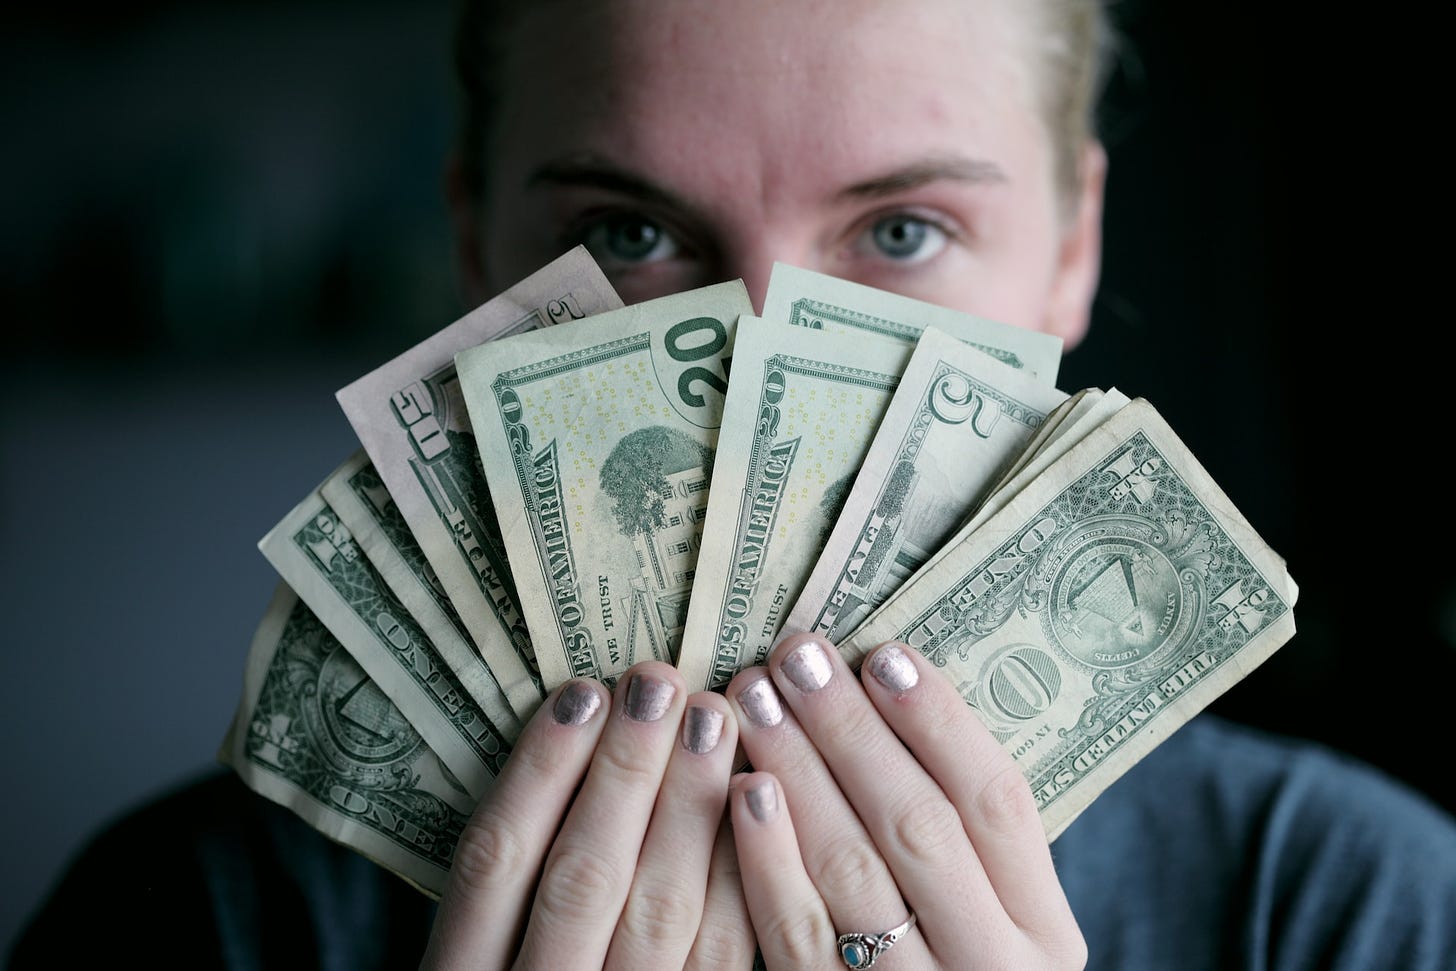 Photo of a woman's face, just showing her eyes and forehead. In front of her face, she is holding American money with both hands, in a fan shape of different denominations.